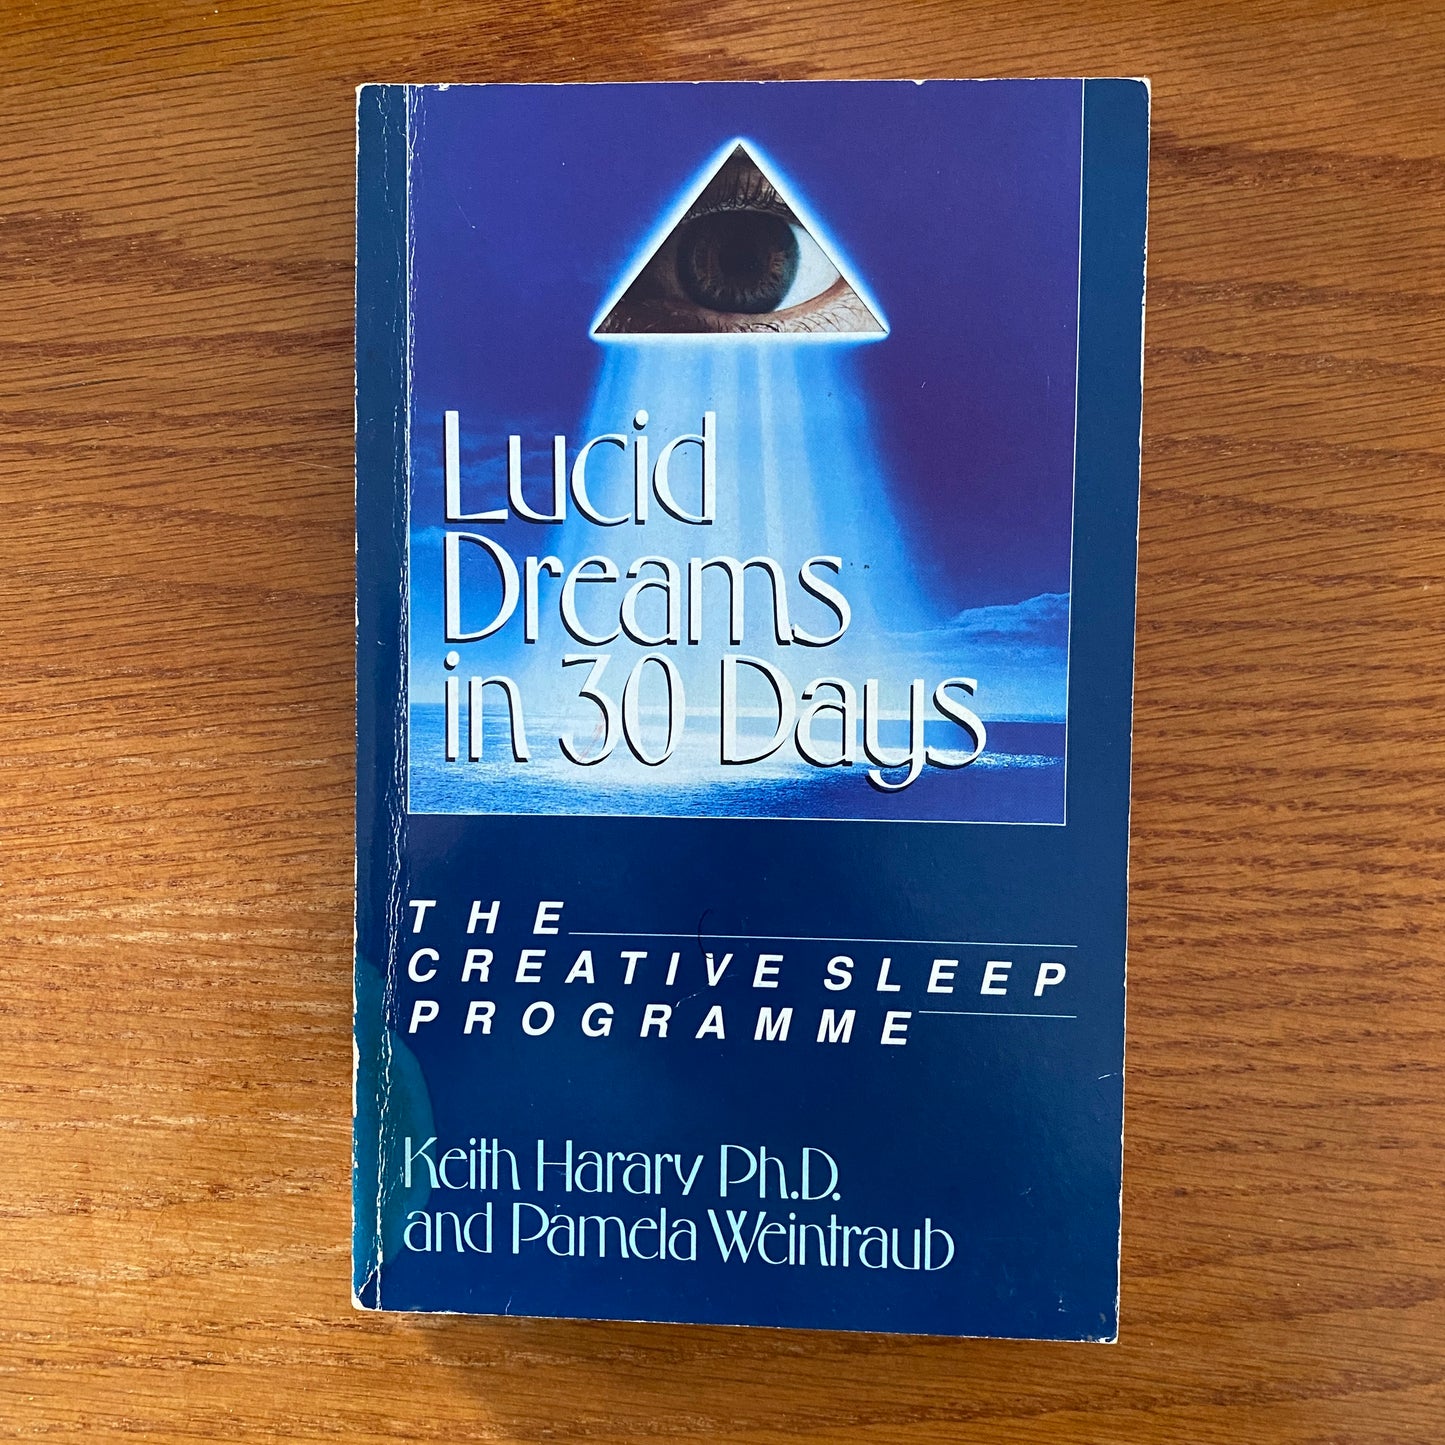 Lucid Dreaming In 30 Days - Keith Harary Ph.D. & Pamela Weintraub